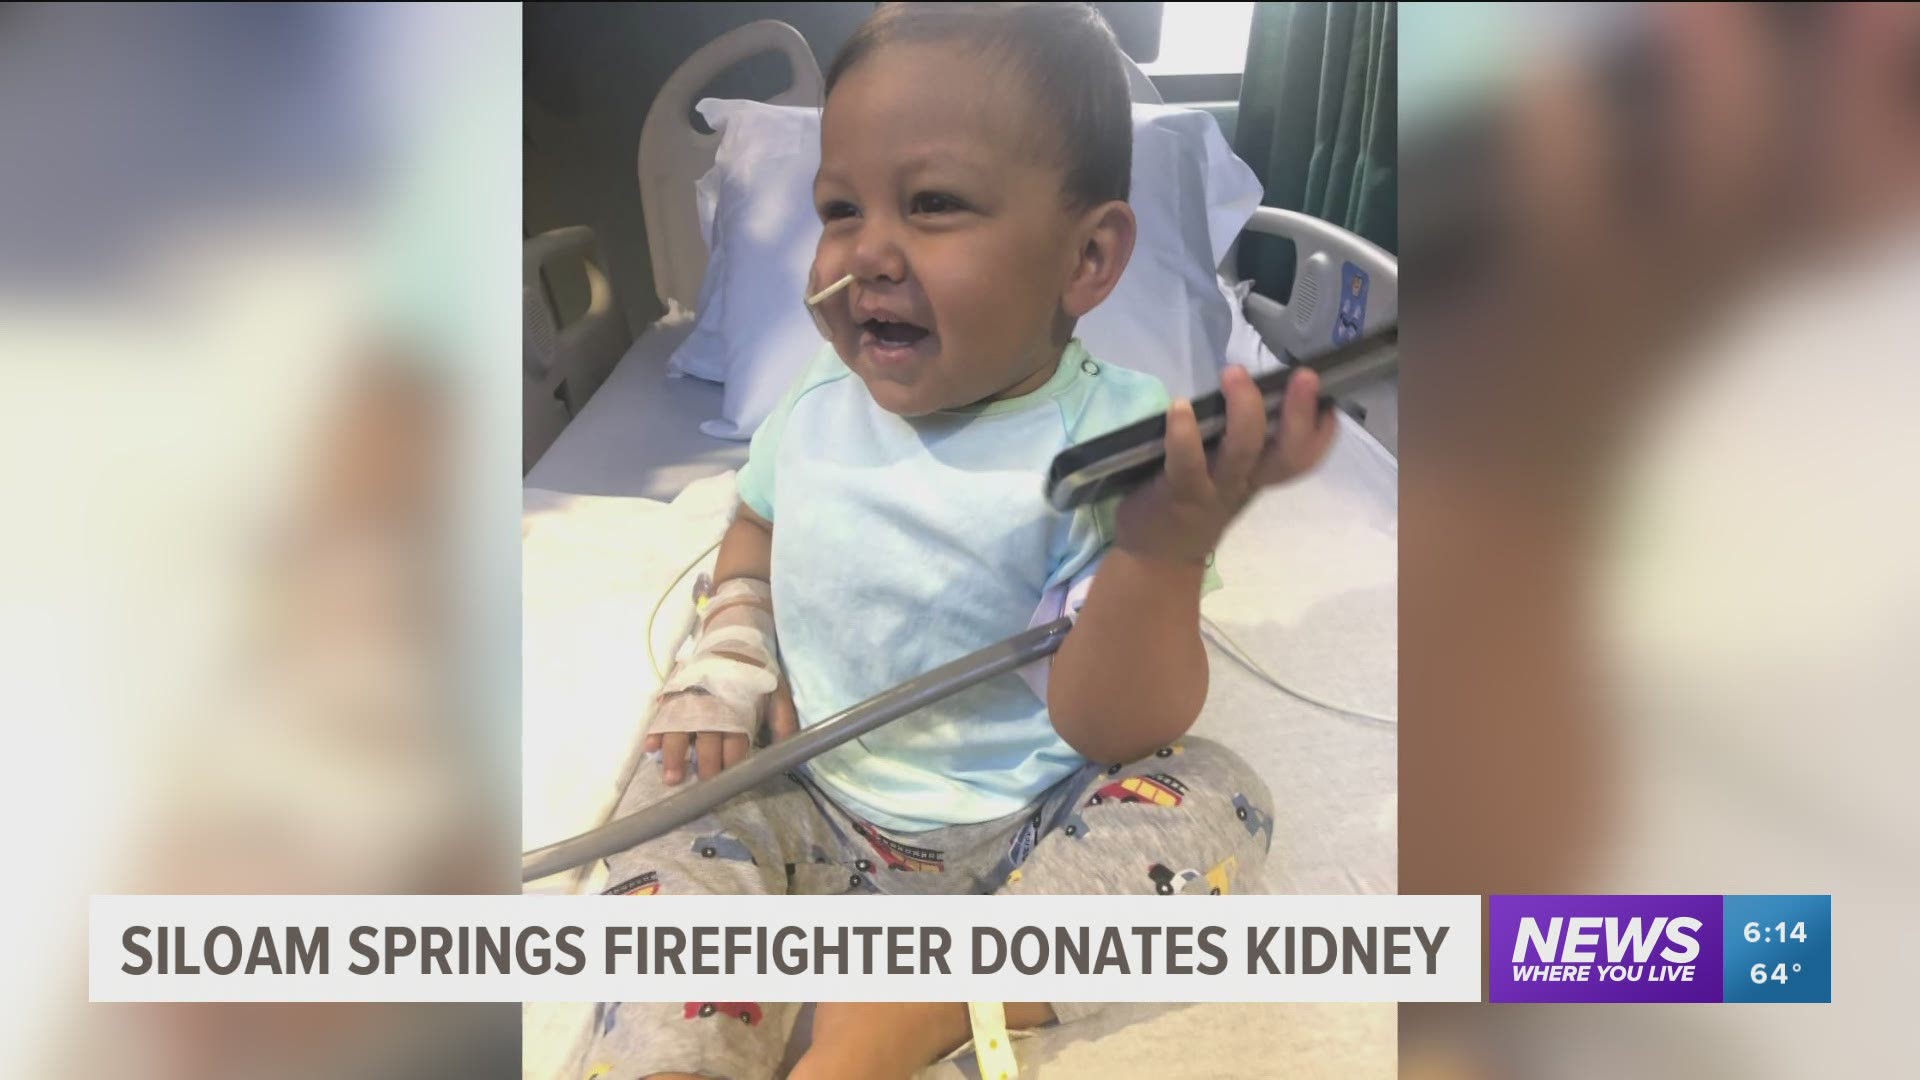 Siloam Springs firefighter Zac Griggs will be donating a kidney to his young son on November 12. https://bit.ly/3hVUD0E